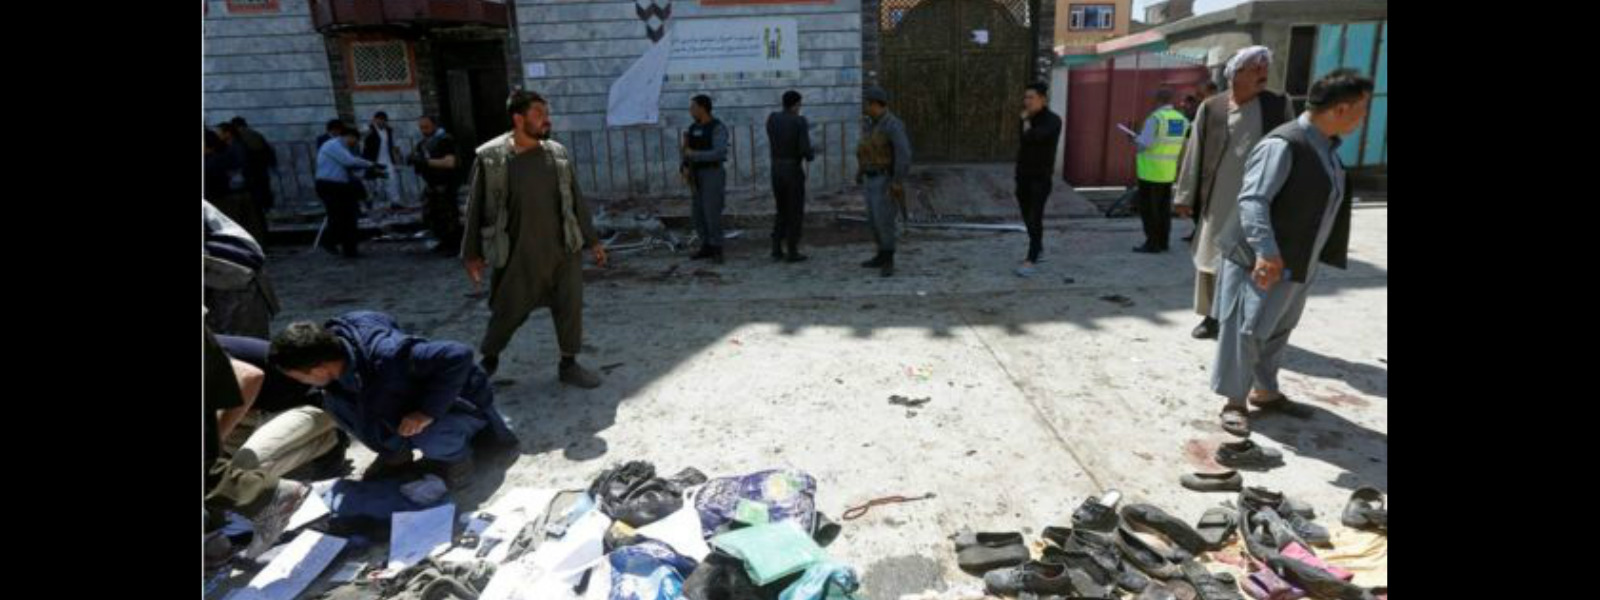 31 lives claimed by a suicide bomber in Kabul